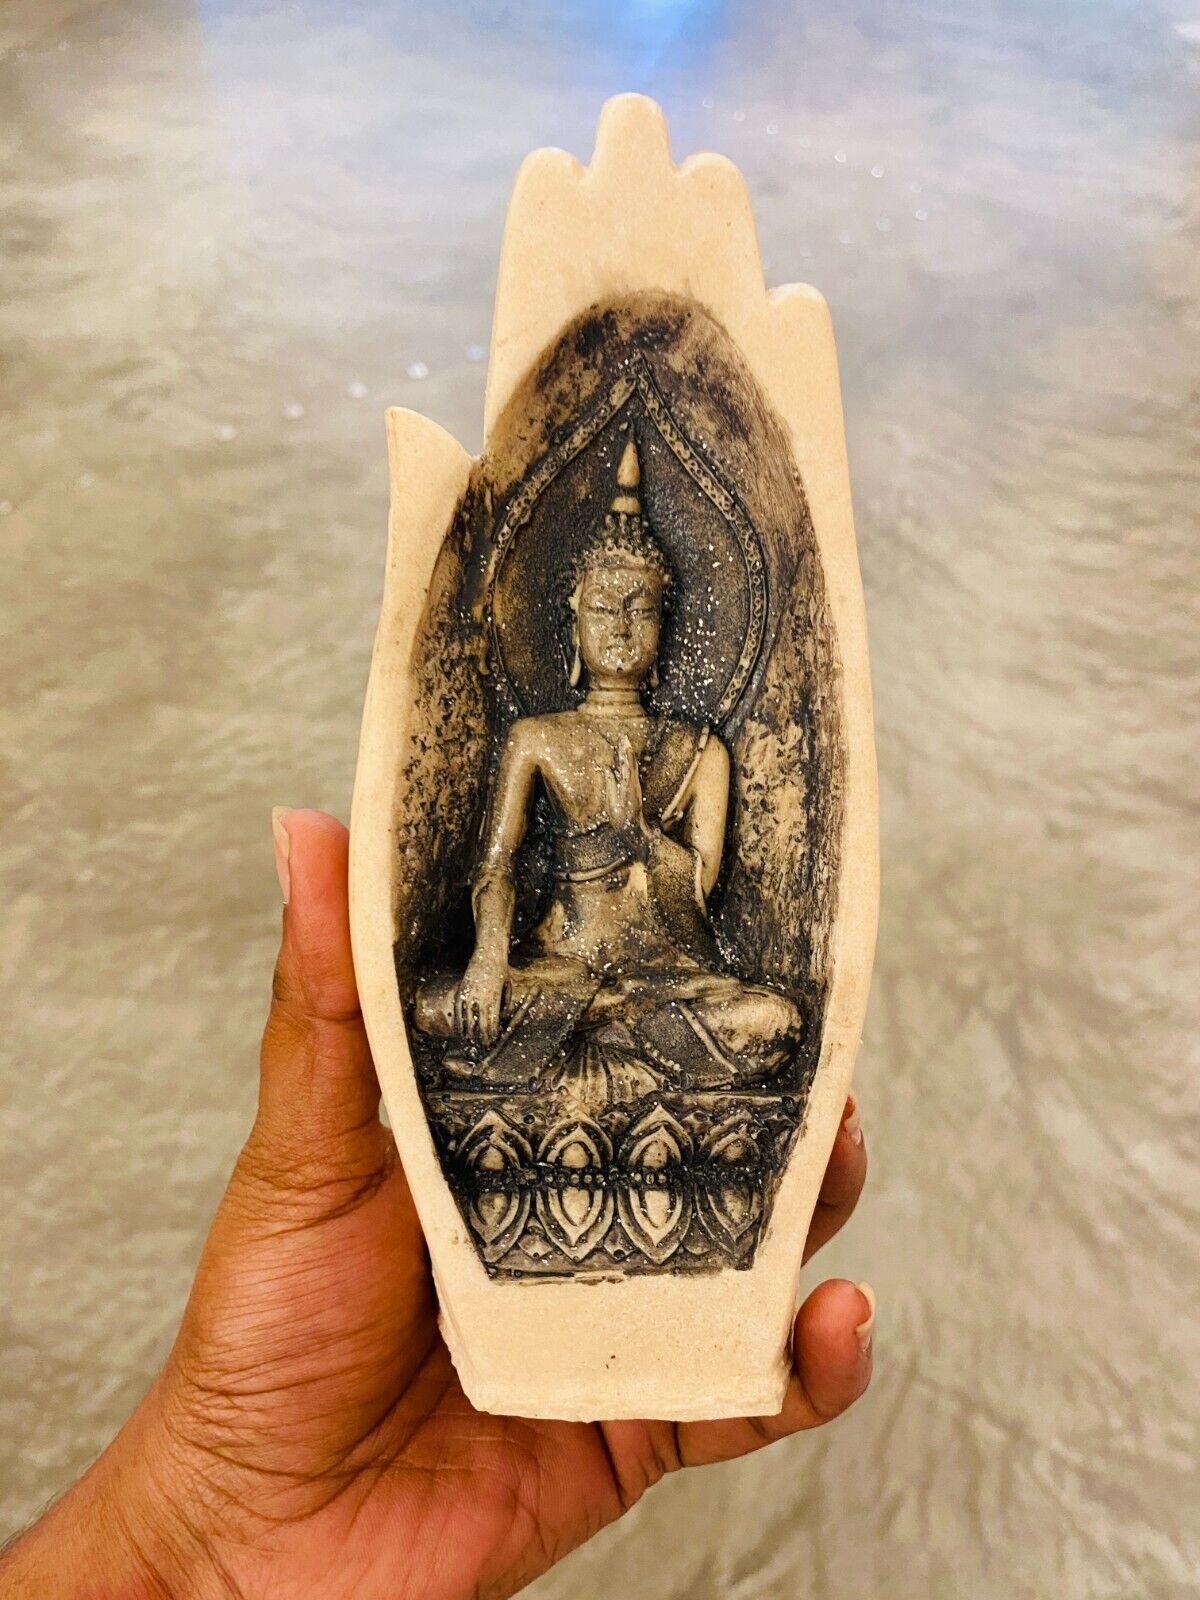 BUDHDHA Statue in Hand Natural Stone craving Sri Lankan Home decor Collectible